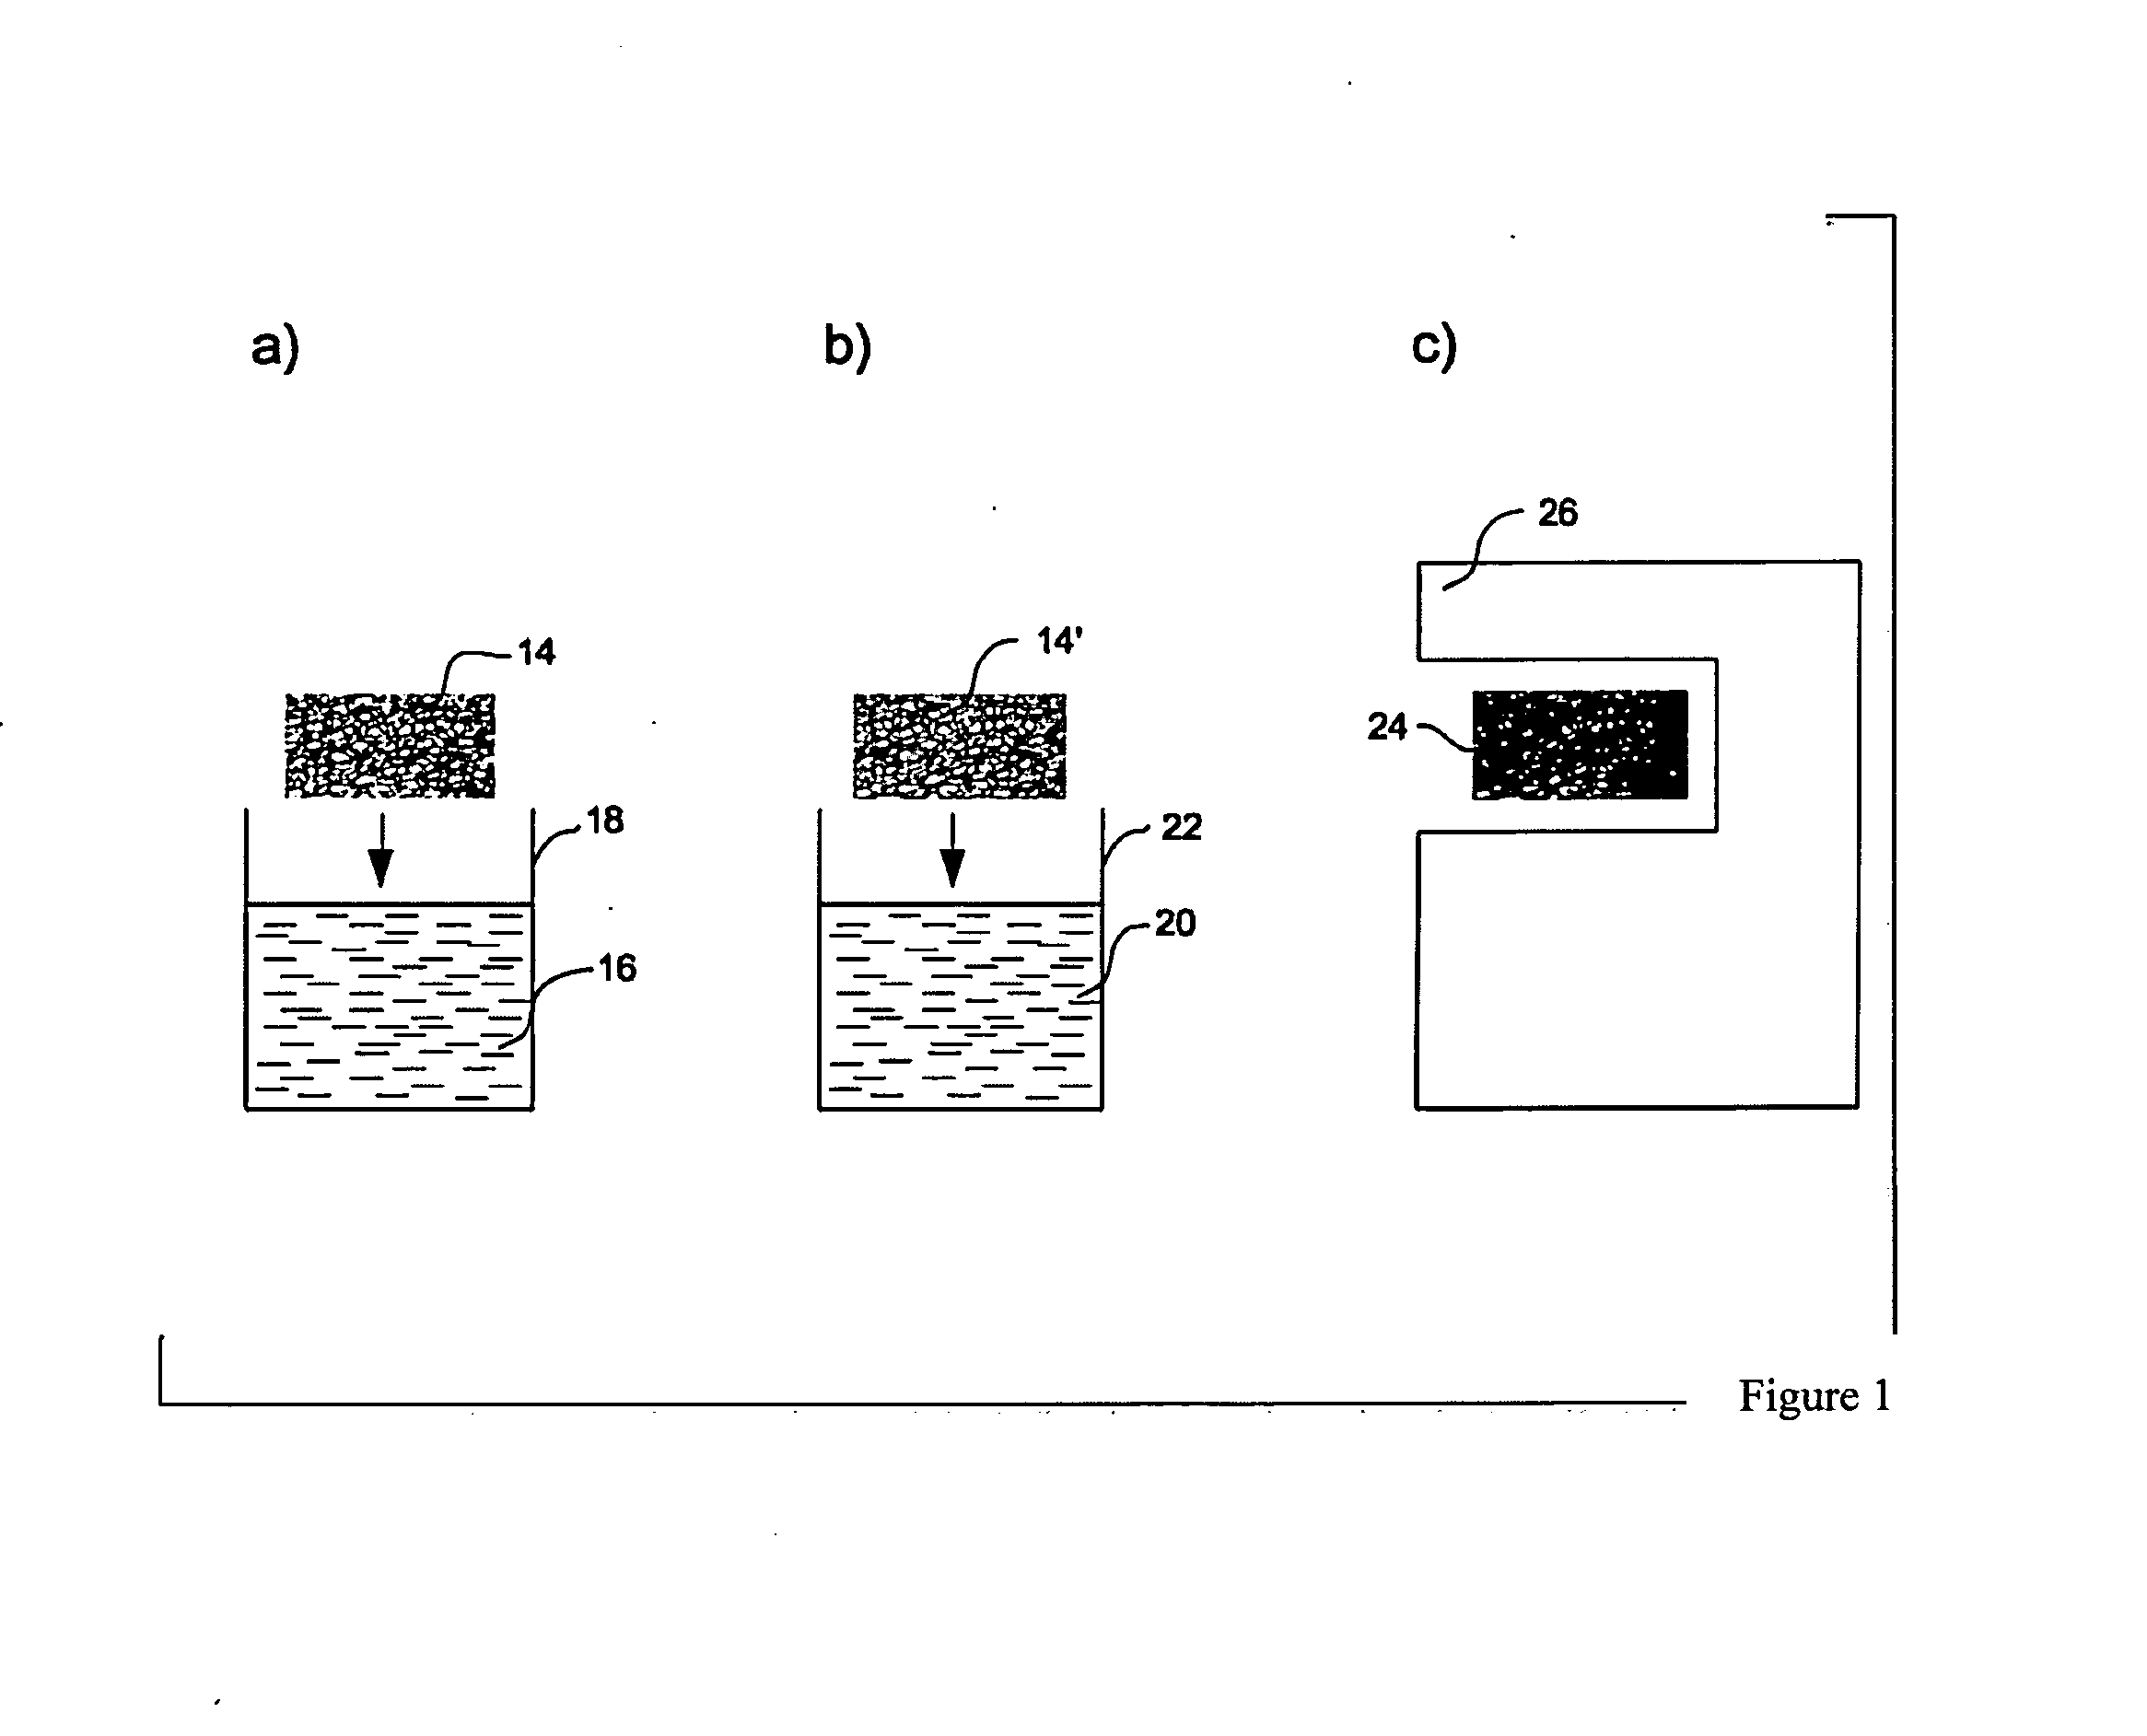 Carbon sorbent for reversible ammonia sorption